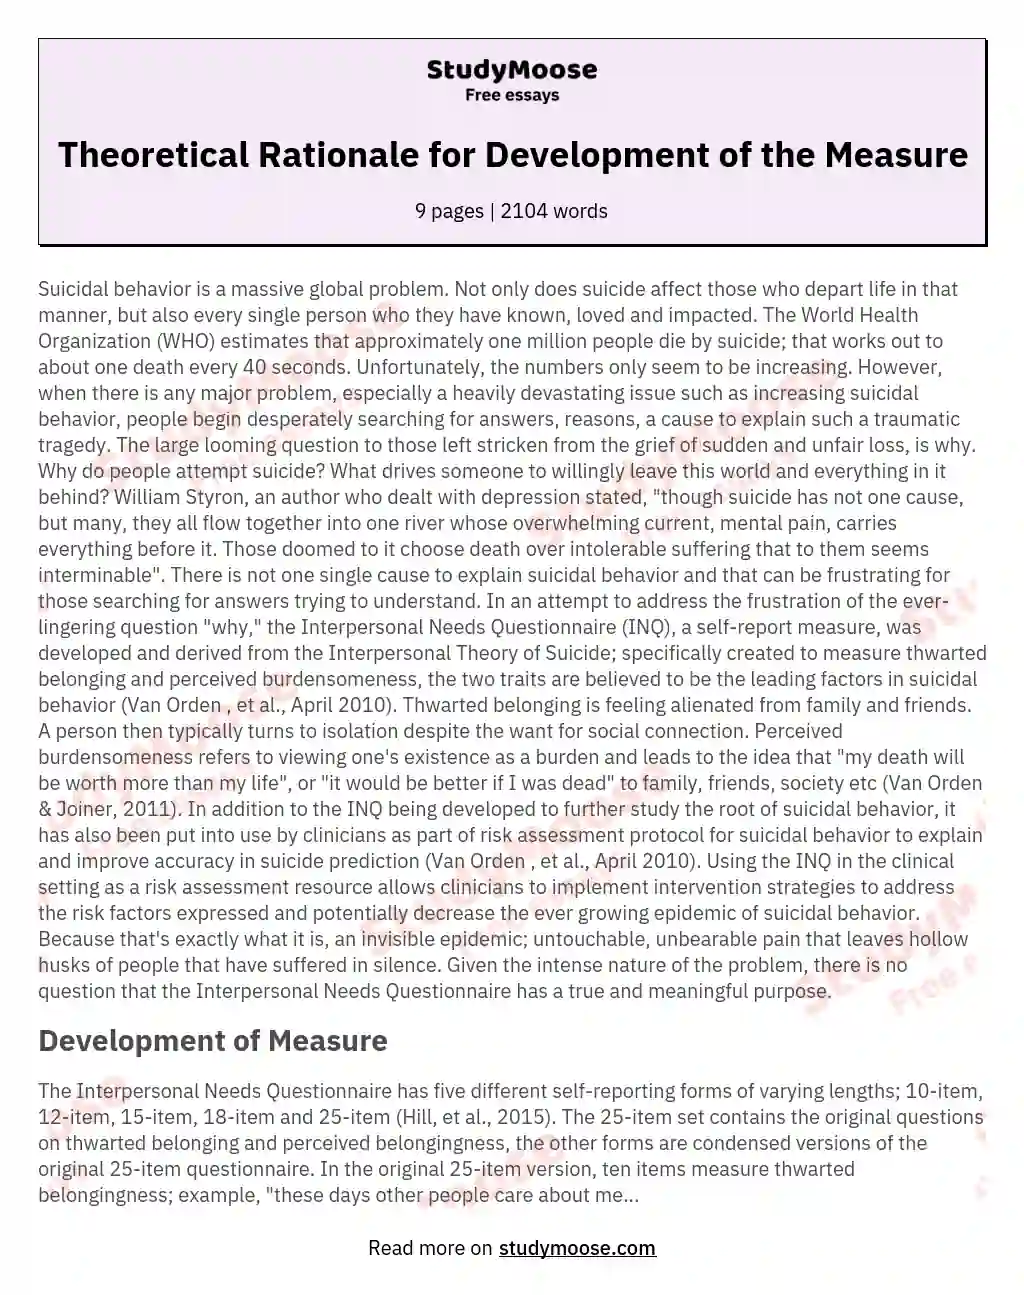 Theoretical Rationale for Development of the Measure essay